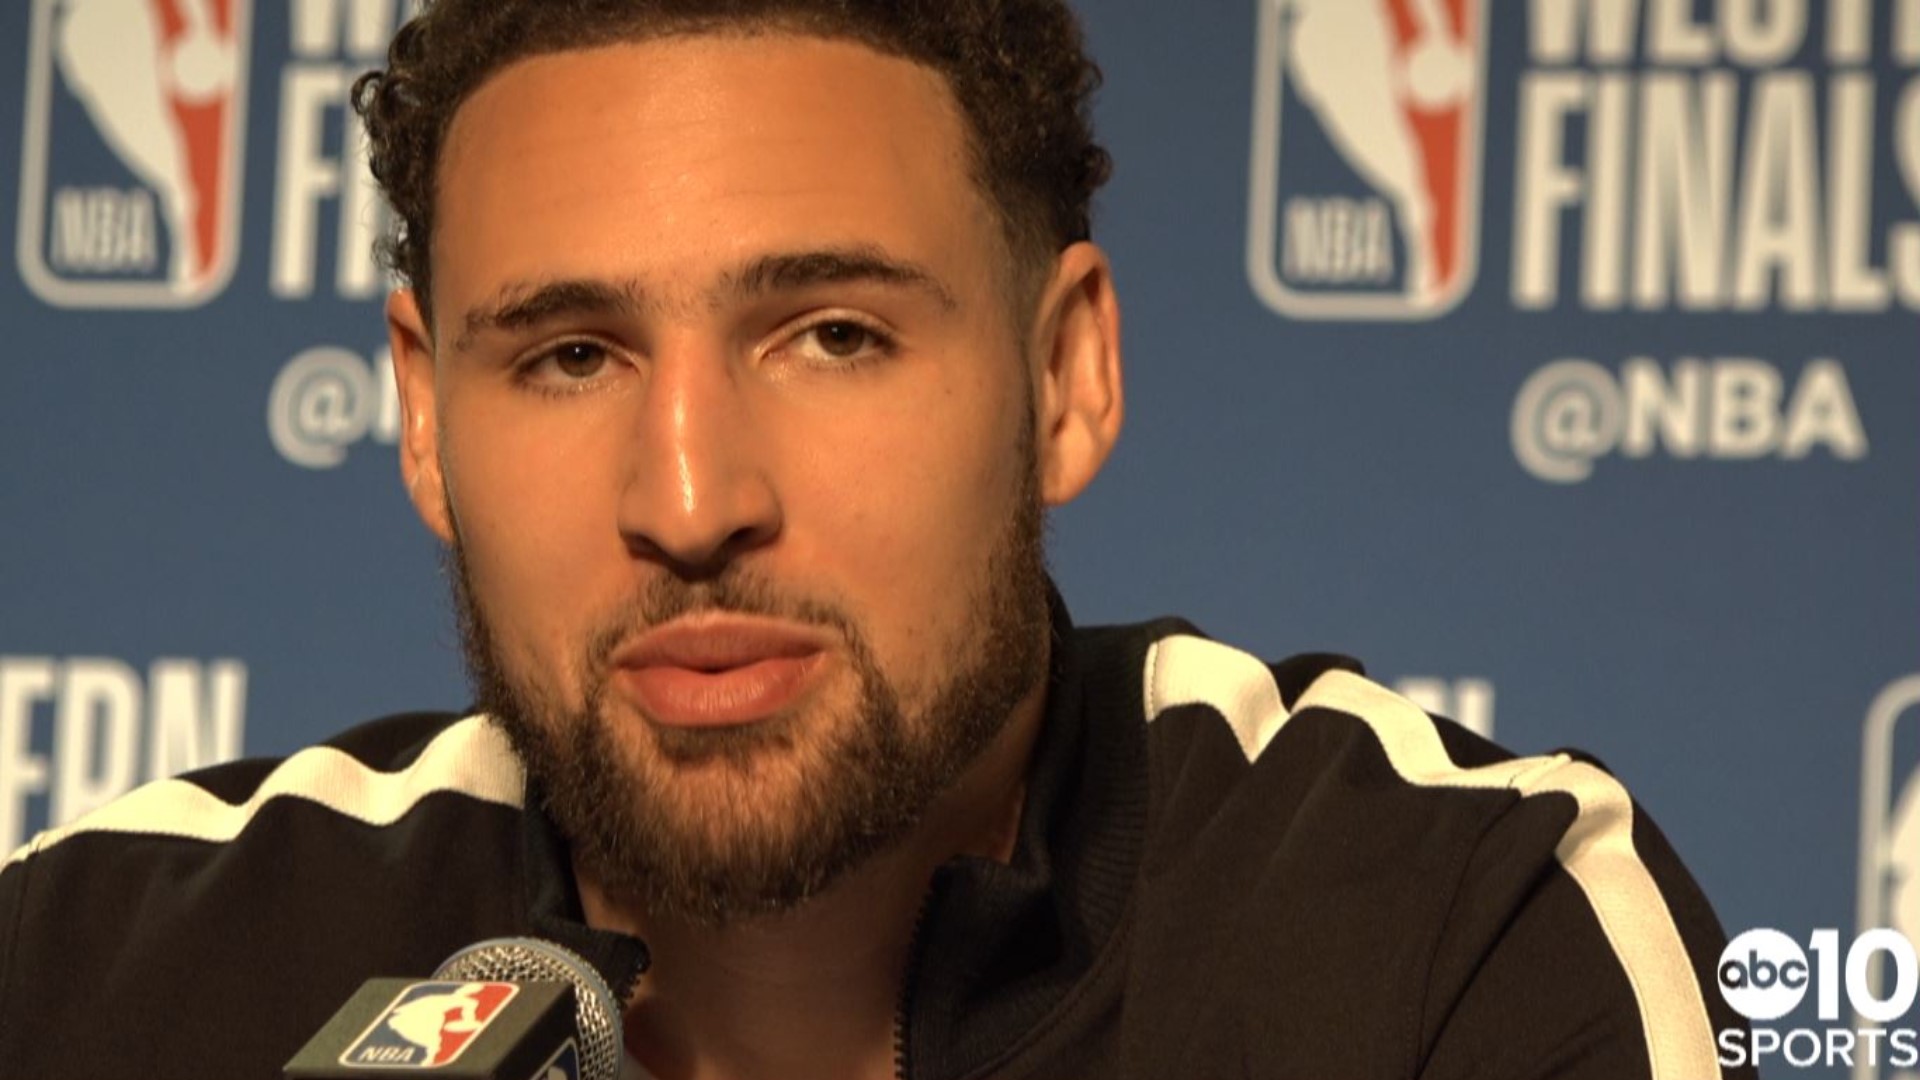 Warriors guard Klay Thompson discusses his rough shooting night, the superb defense from Andre Iguodala and the sibling rivalry between his teammate Stephen Curry and Trail Blazers guard Seth Curry, following Golden State's win over Portland in Game 2 of the Western Conference Finals to his team a 2-0 series lead.